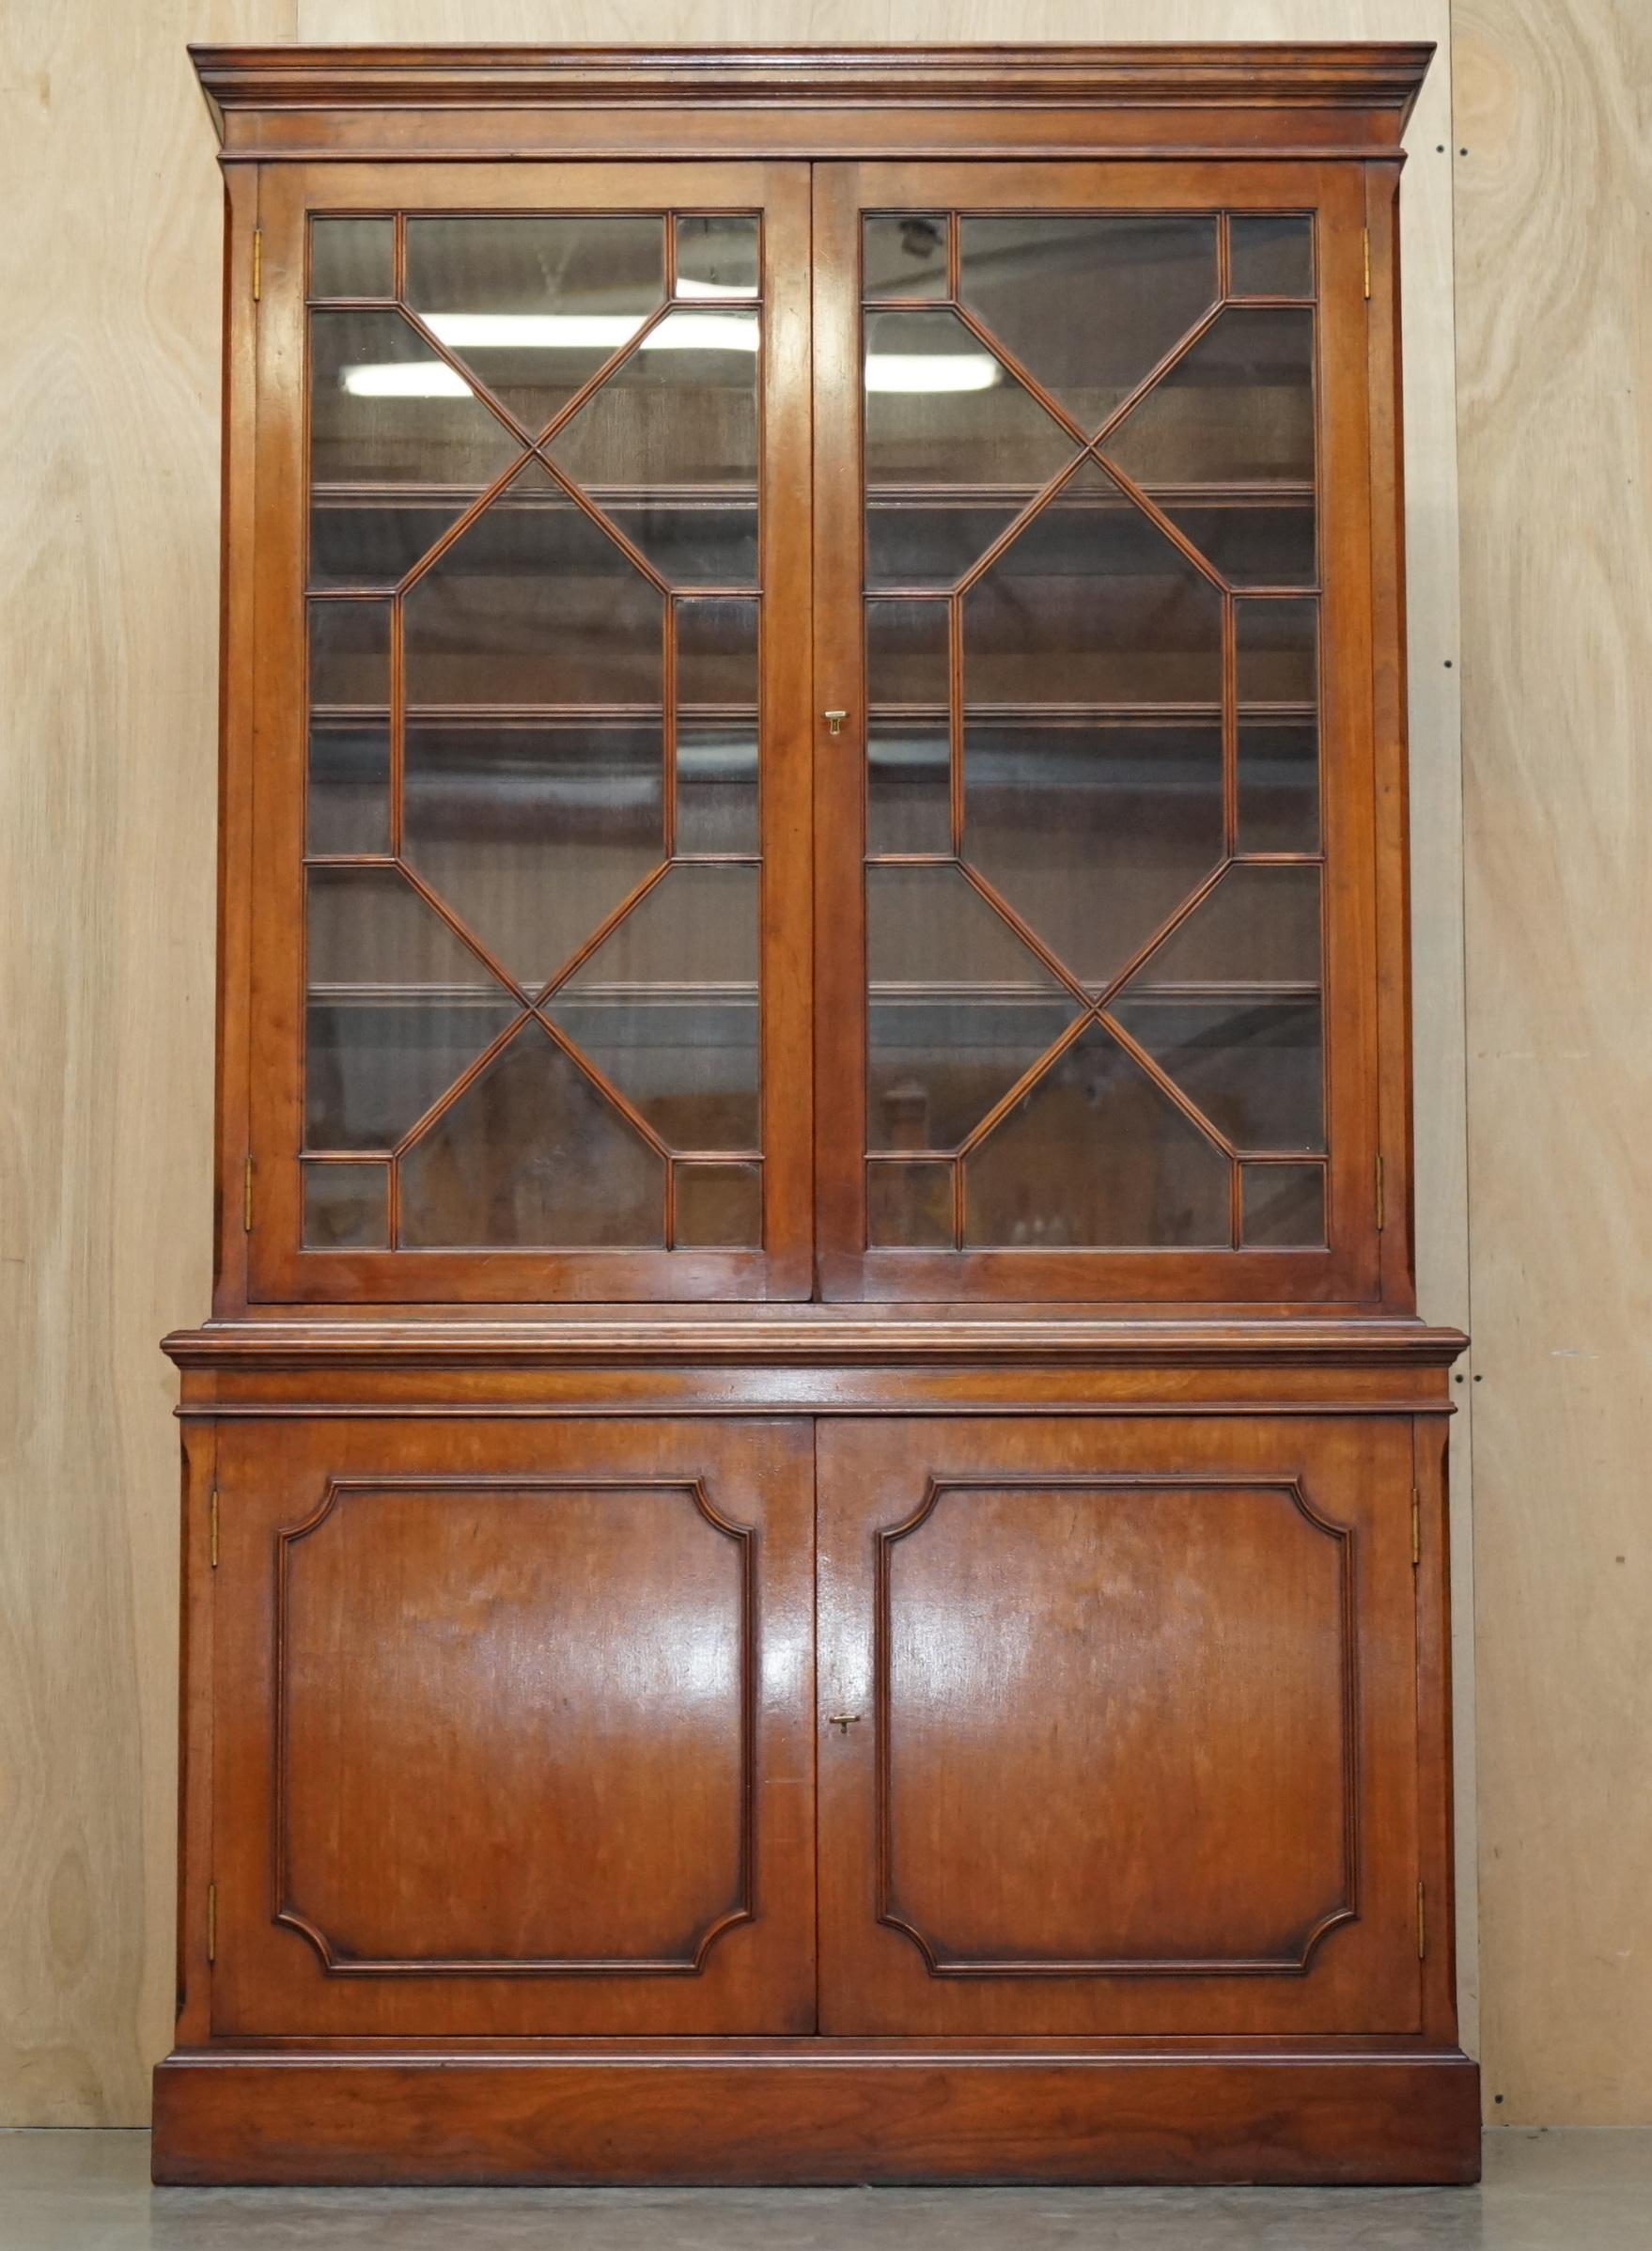 Royal House Antiques

Royal House Antiques is delighted to offer for this absolutely stunning REH Kennedy England made for Harrods London Astral Glazed library bookcase with cupboard base

Please note the delivery fee listed is just a guide, it